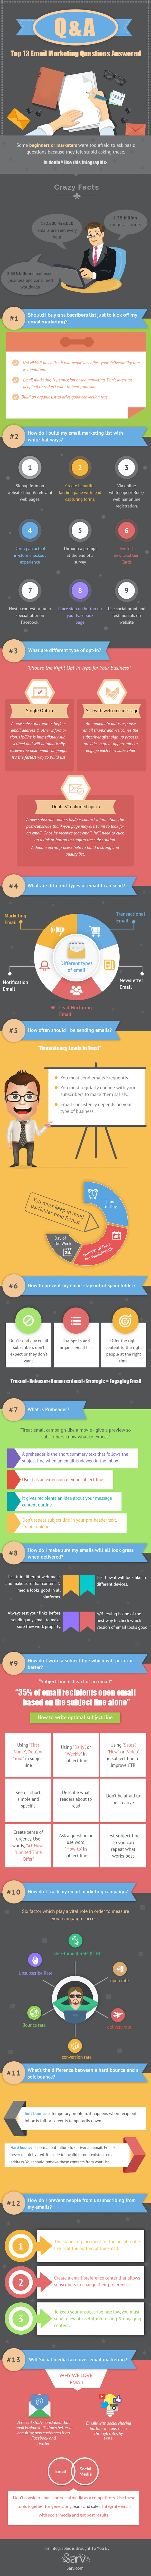 top-13-email-marketing-questions